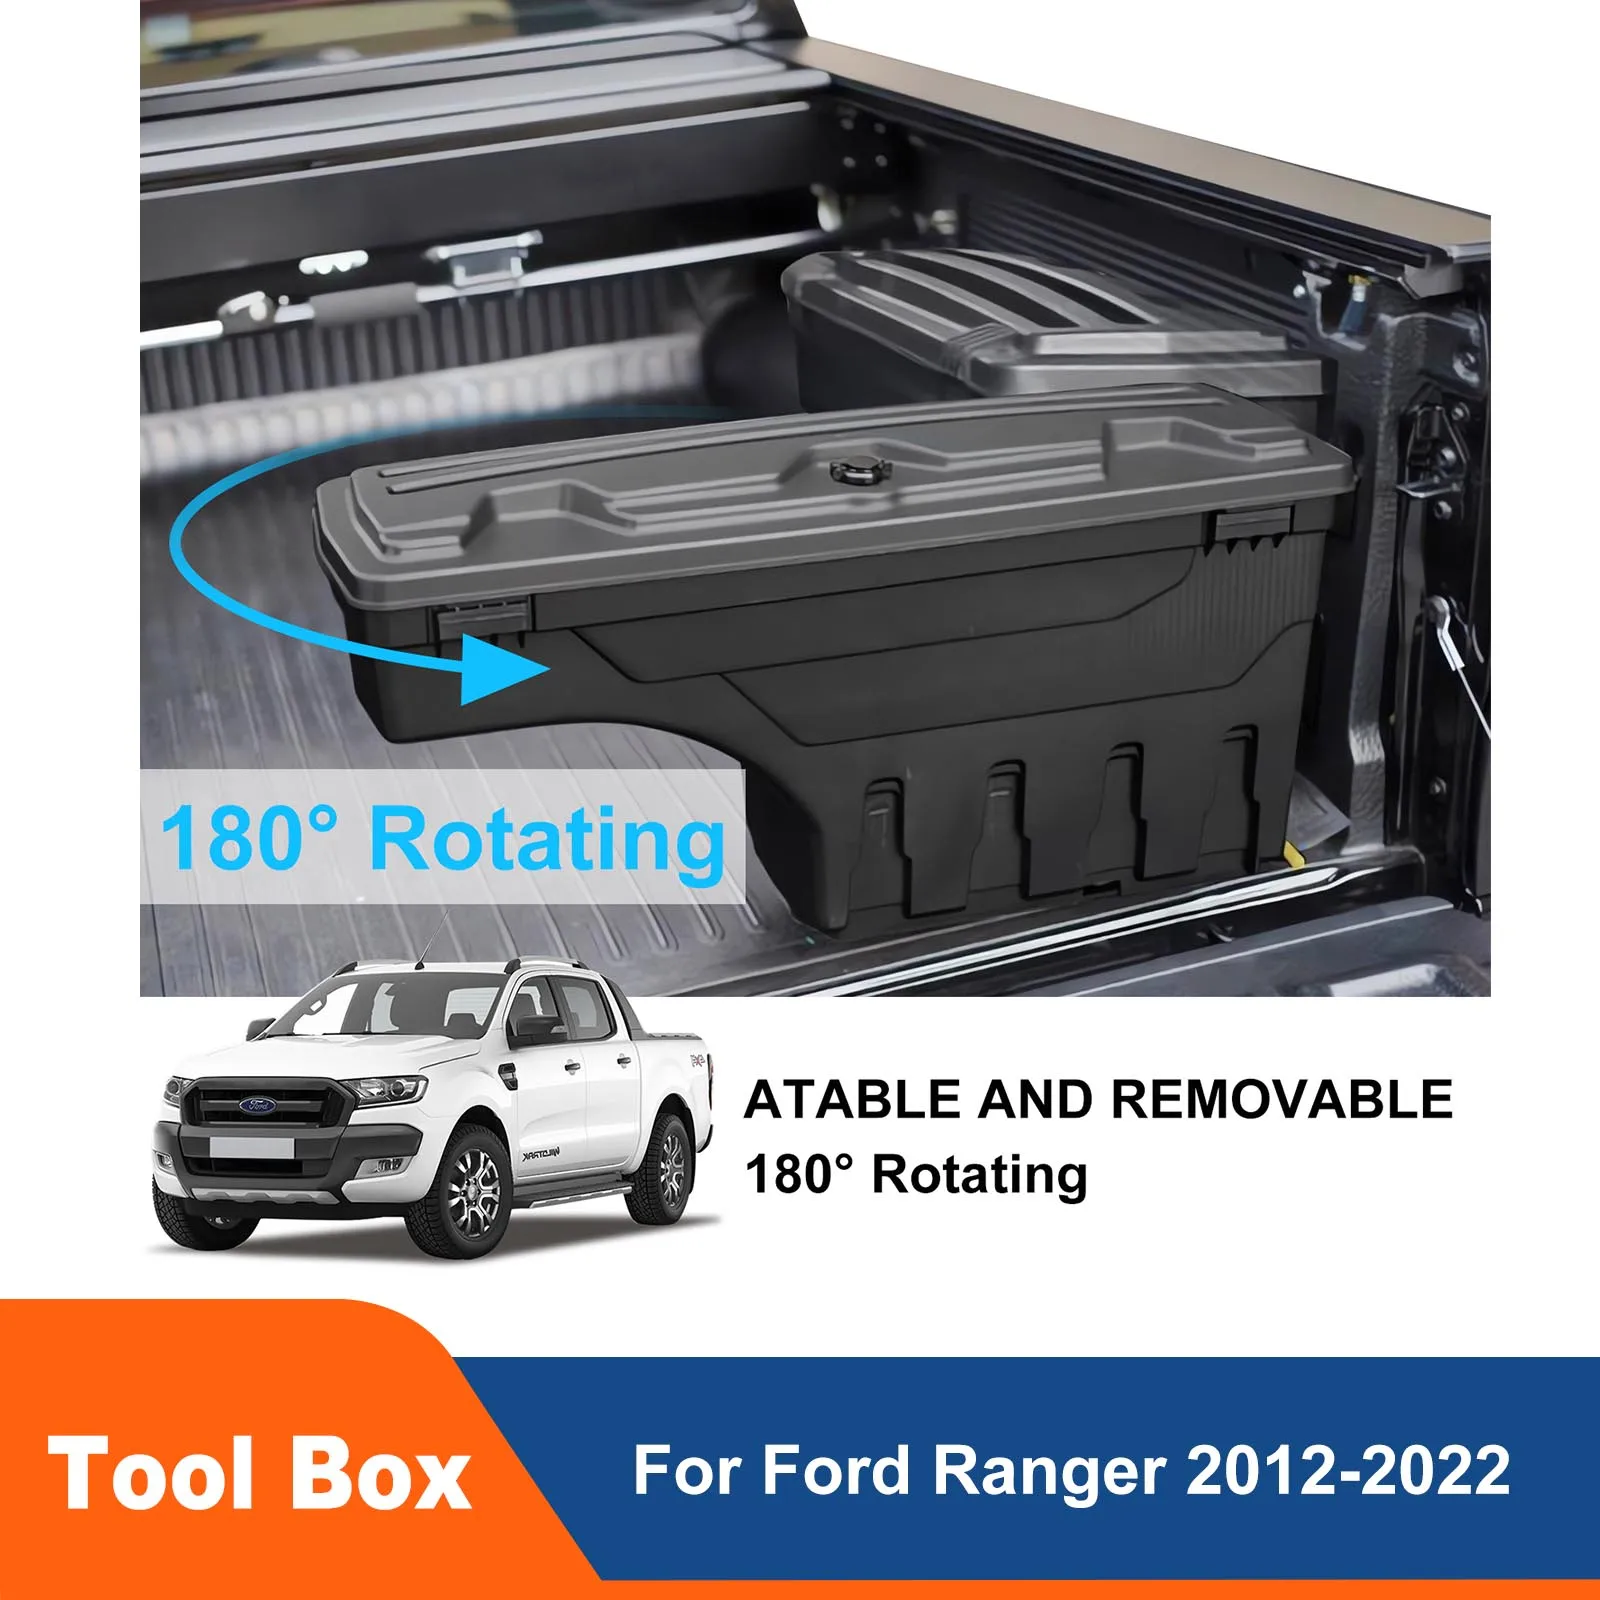 

1PC Trunk Tailgate Swing Case Storage Tool Box Left/Right For Ford Ranger Wildtrak 2012-2022 T6 T7 T8 PX PX2 PX3 XLT XL XLS